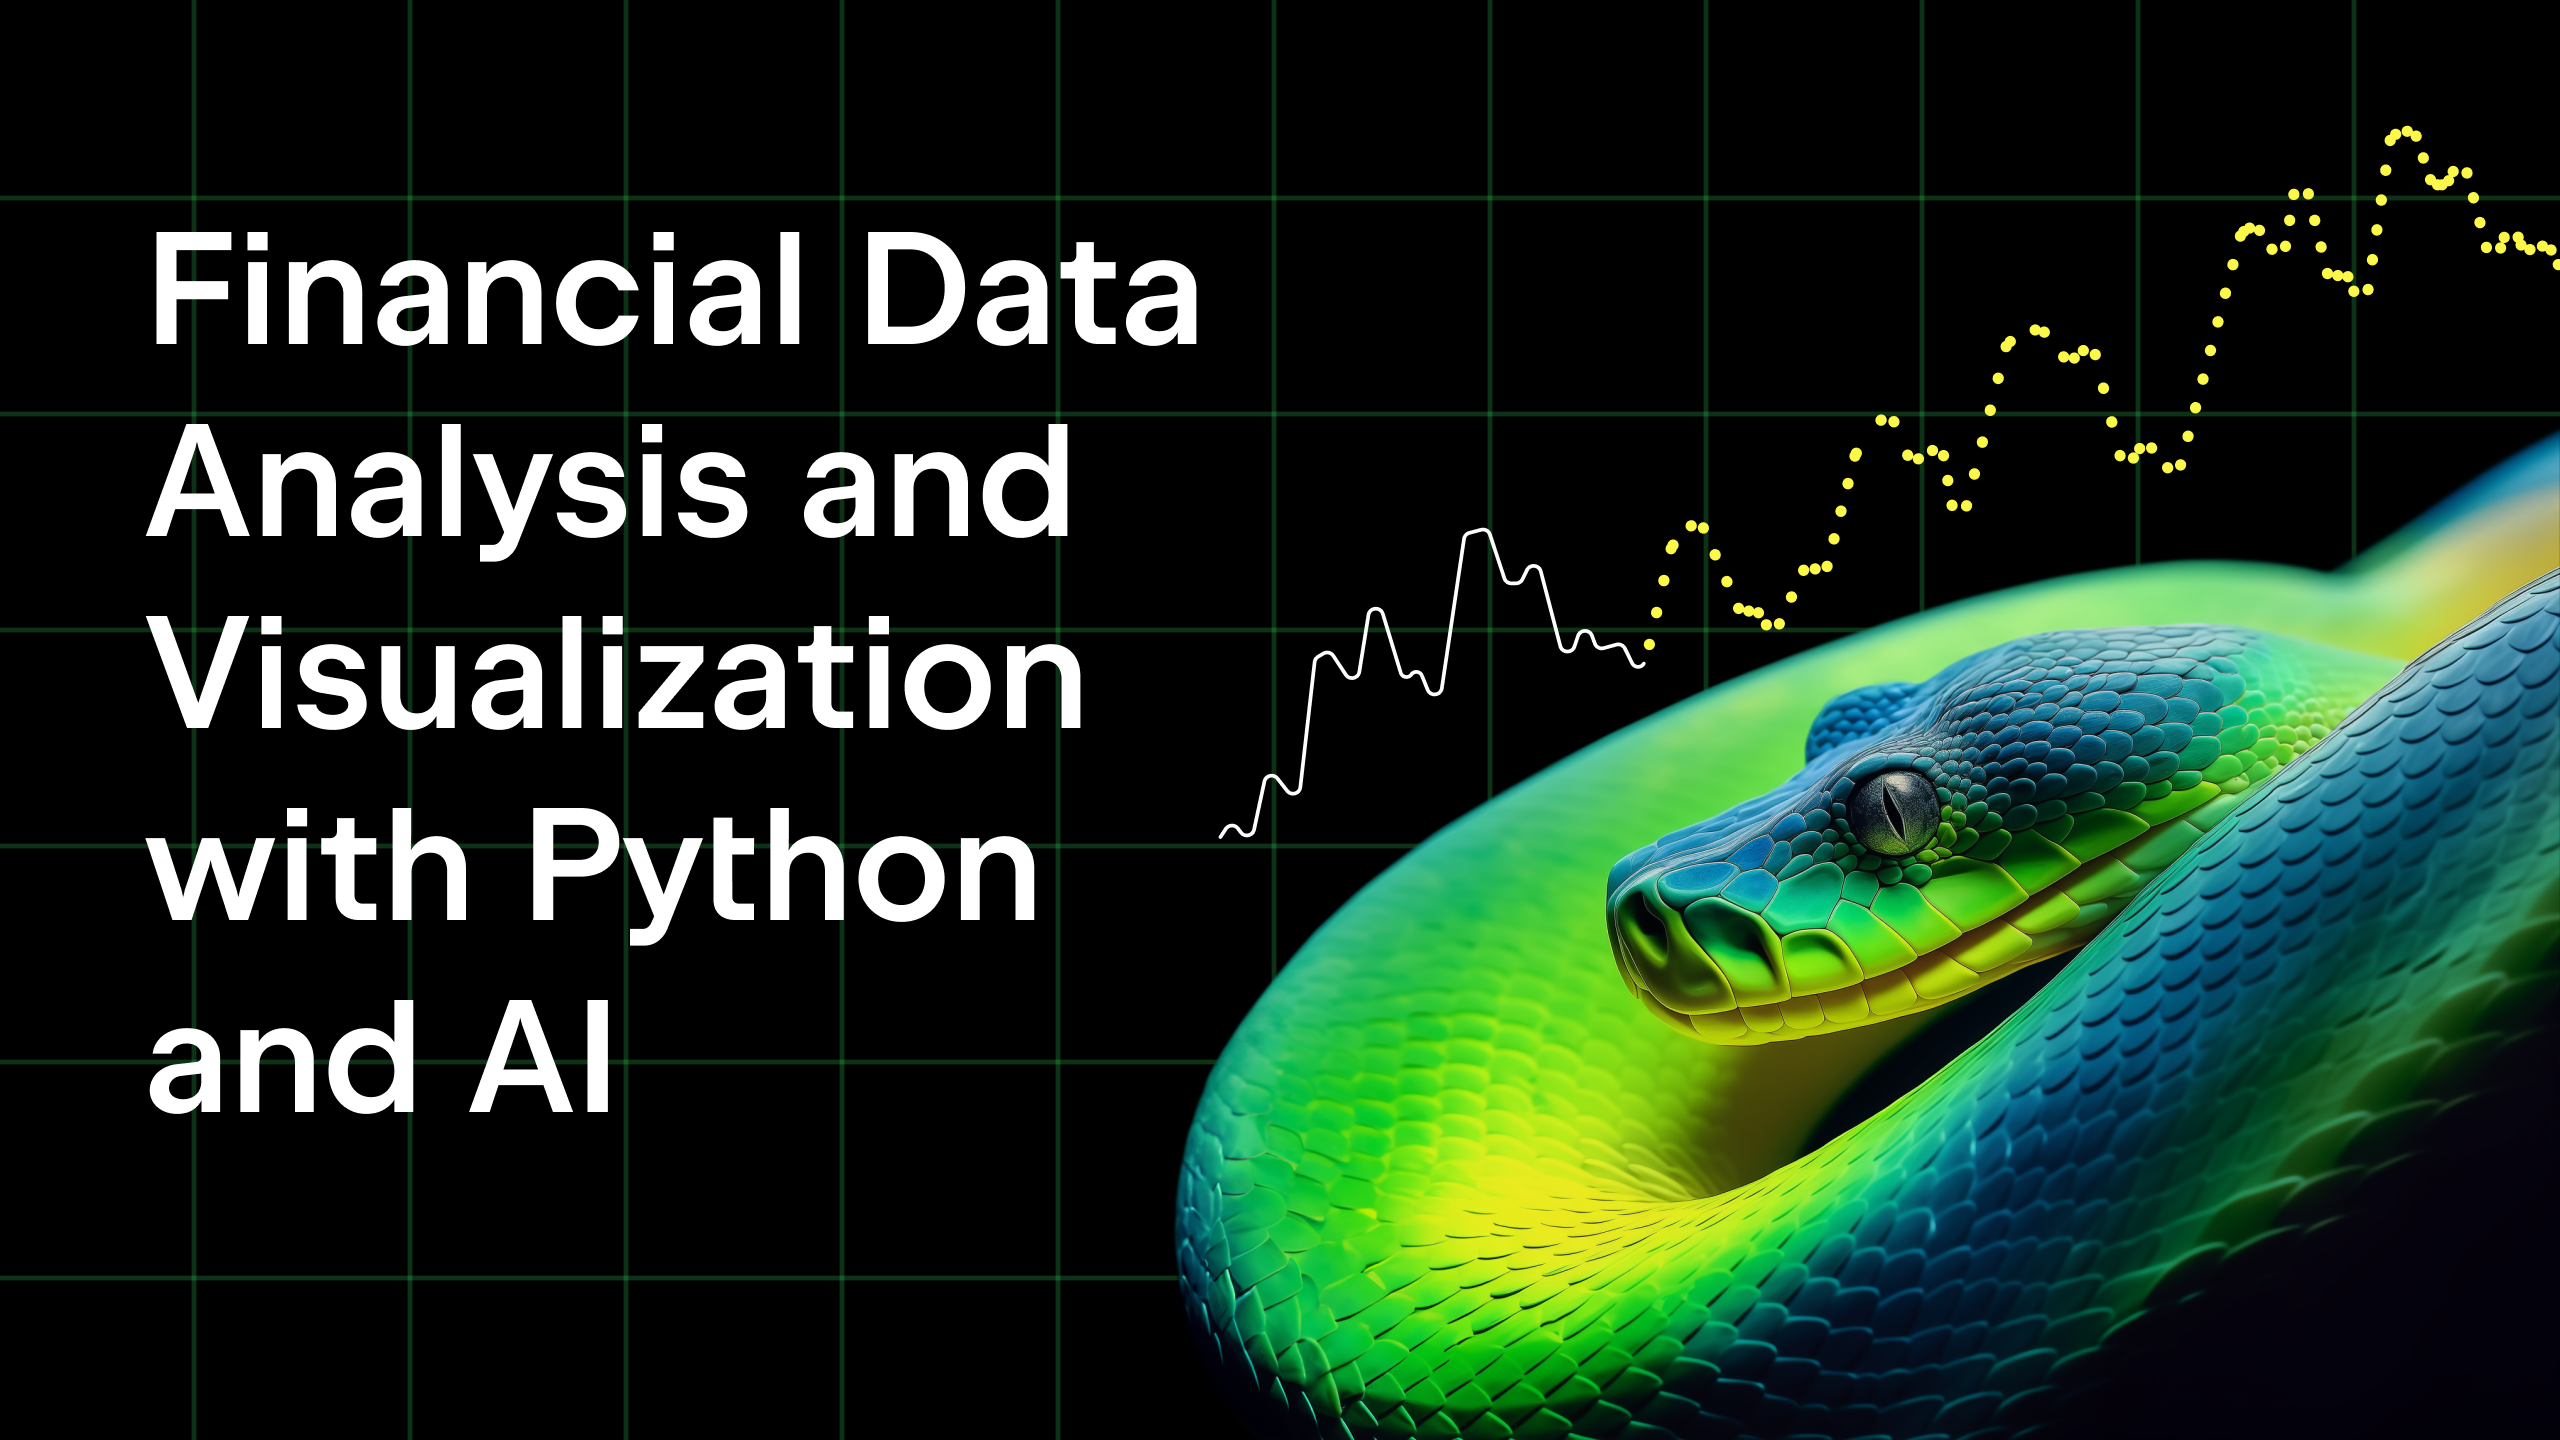 Financial Data Analysis and Visualization with Python